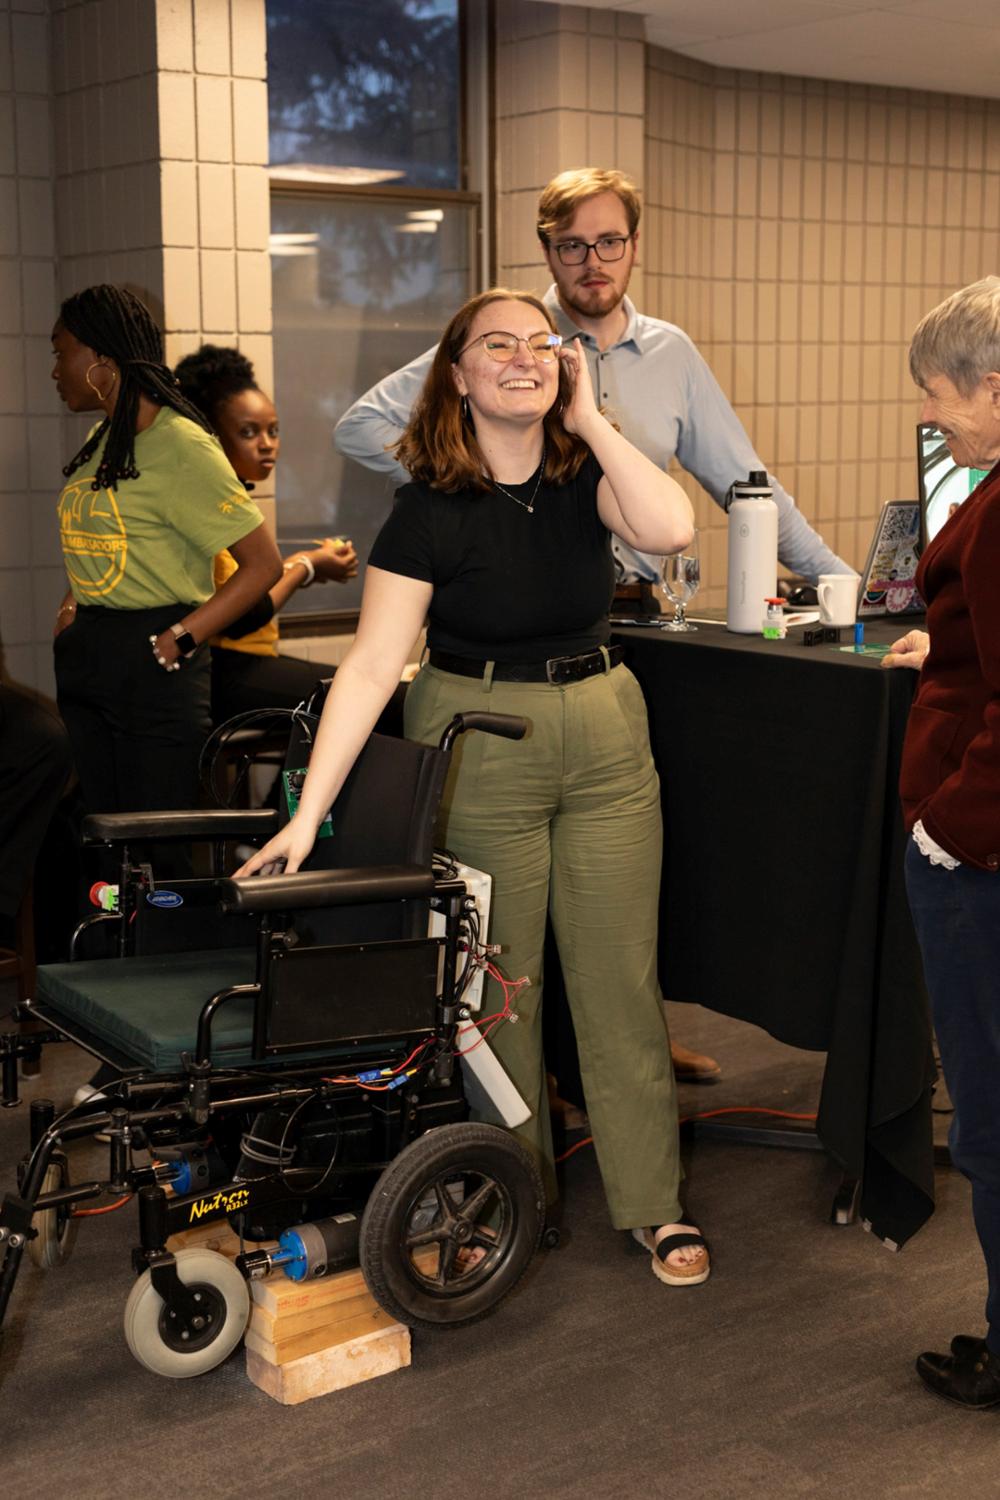 Two smiling individuals stand by automated wheelchair at event.